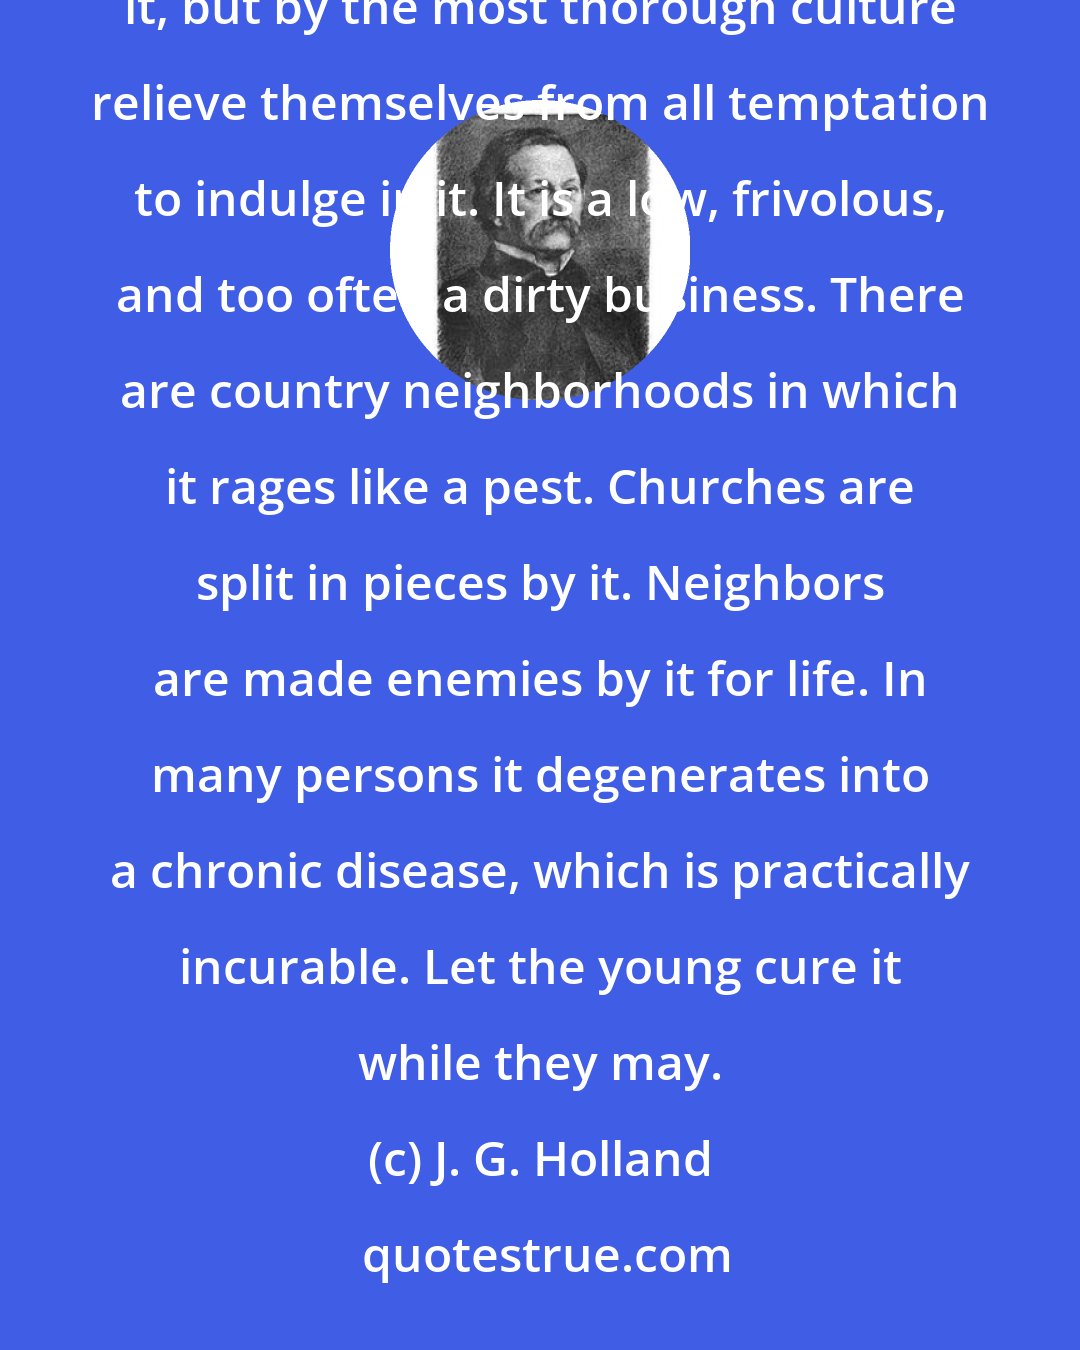 J. G. Holland: Gossip is always a personal confession either of malice or imbecility, and the young should not only shun it, but by the most thorough culture relieve themselves from all temptation to indulge in it. It is a low, frivolous, and too often a dirty business. There are country neighborhoods in which it rages like a pest. Churches are split in pieces by it. Neighbors are made enemies by it for life. In many persons it degenerates into a chronic disease, which is practically incurable. Let the young cure it while they may.